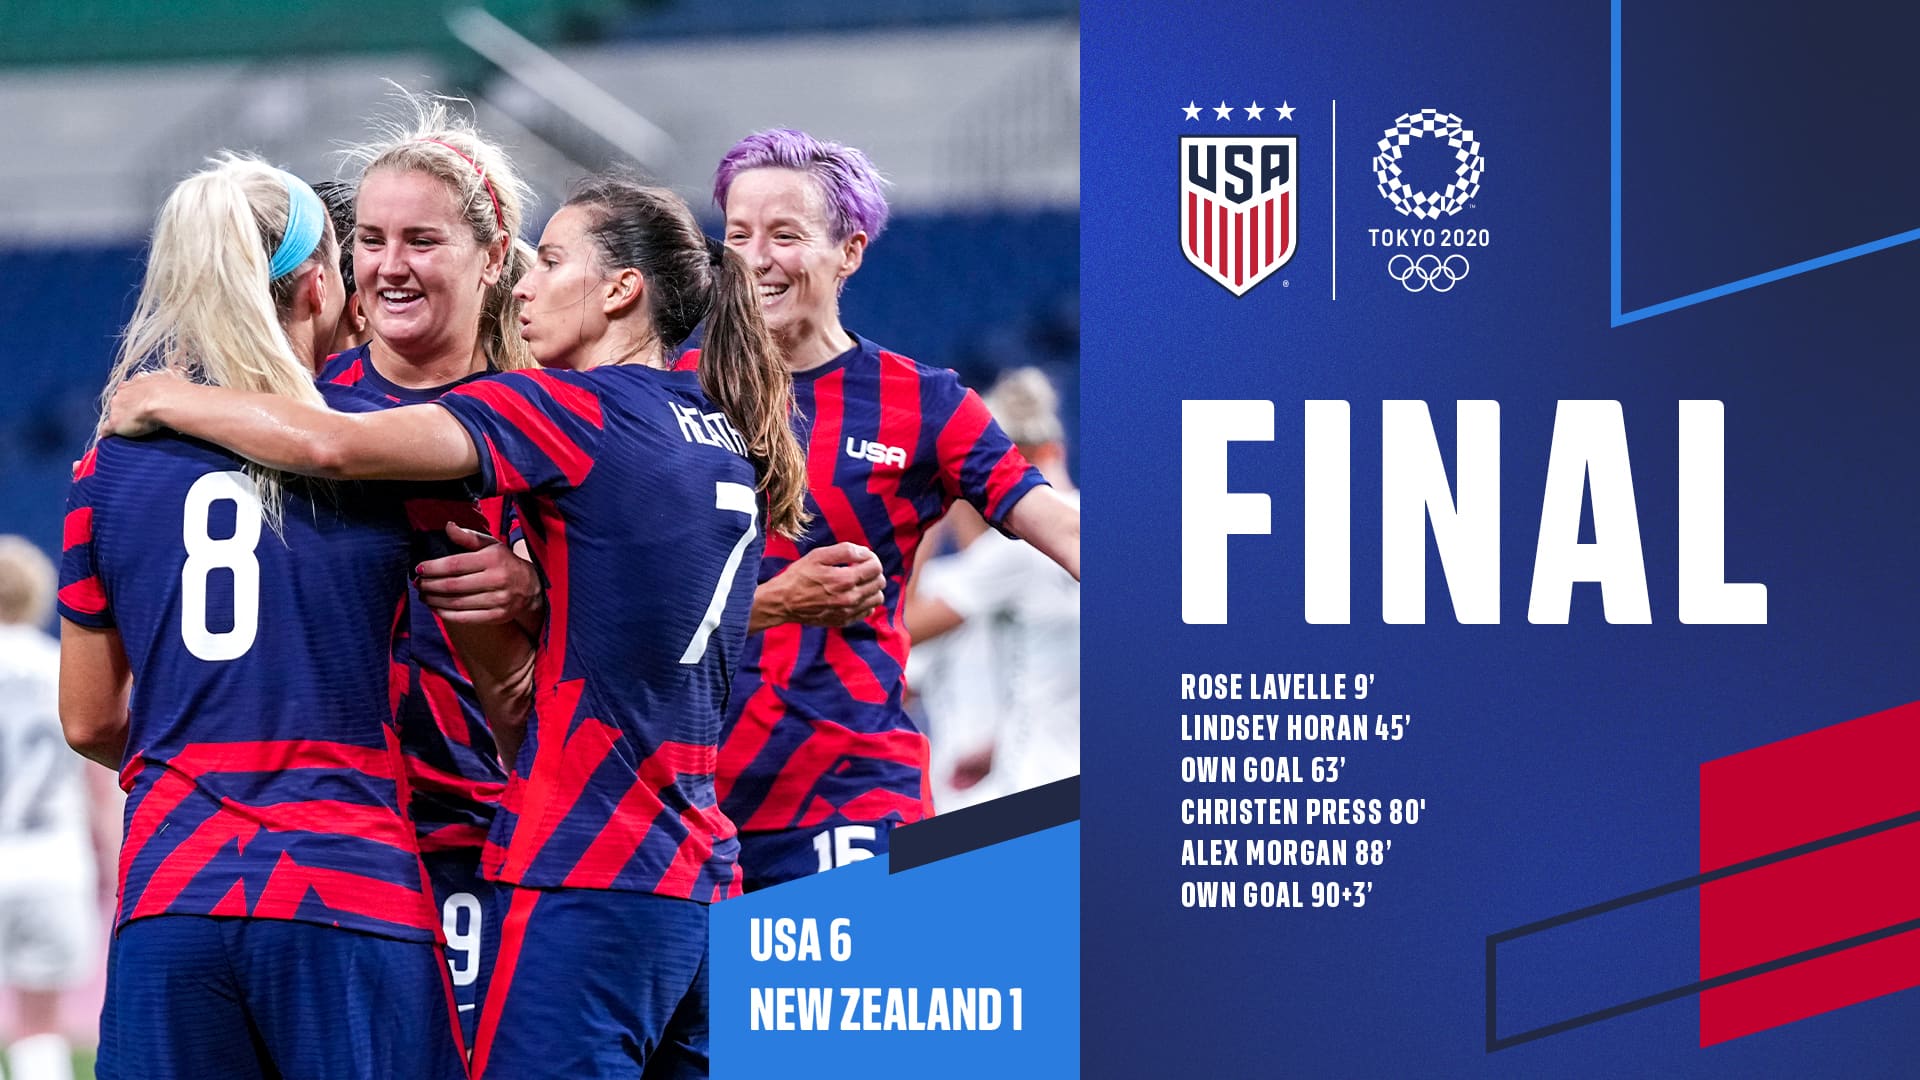 U.S. Women's National Team to Face Morocco or Zambia, Germany and